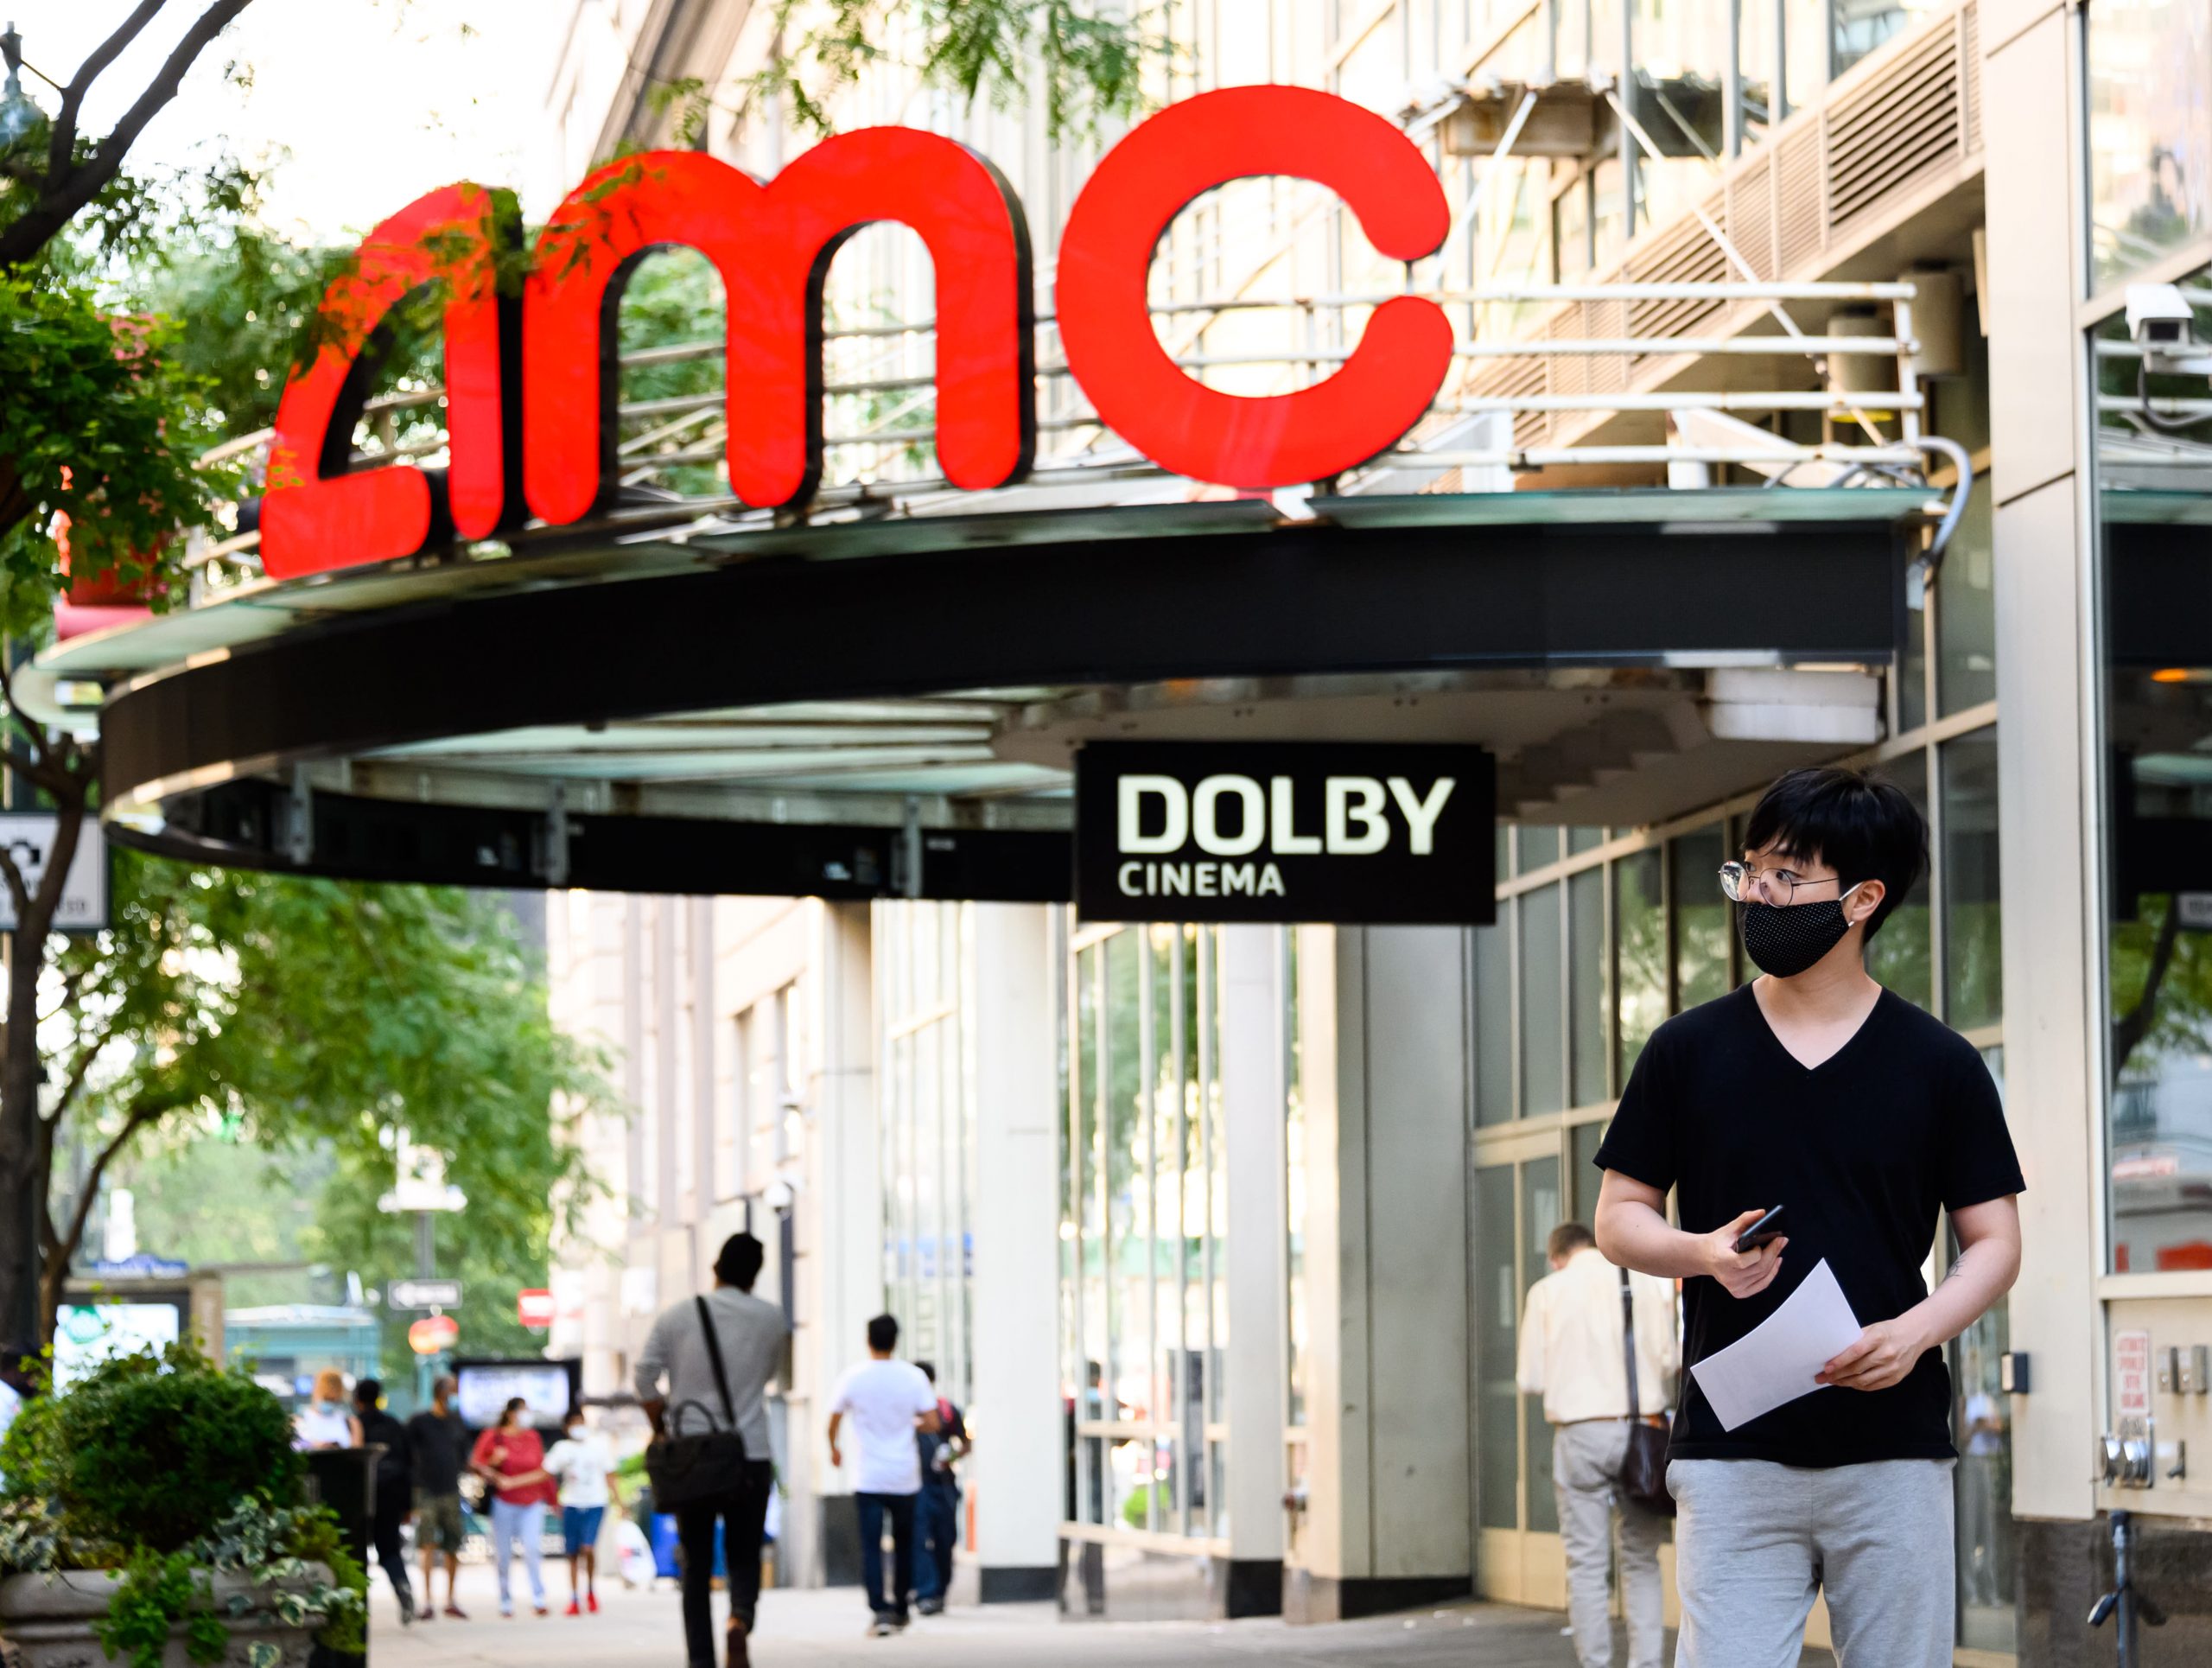 AMC CEO says protecting film theaters open is ‘the correct choice’